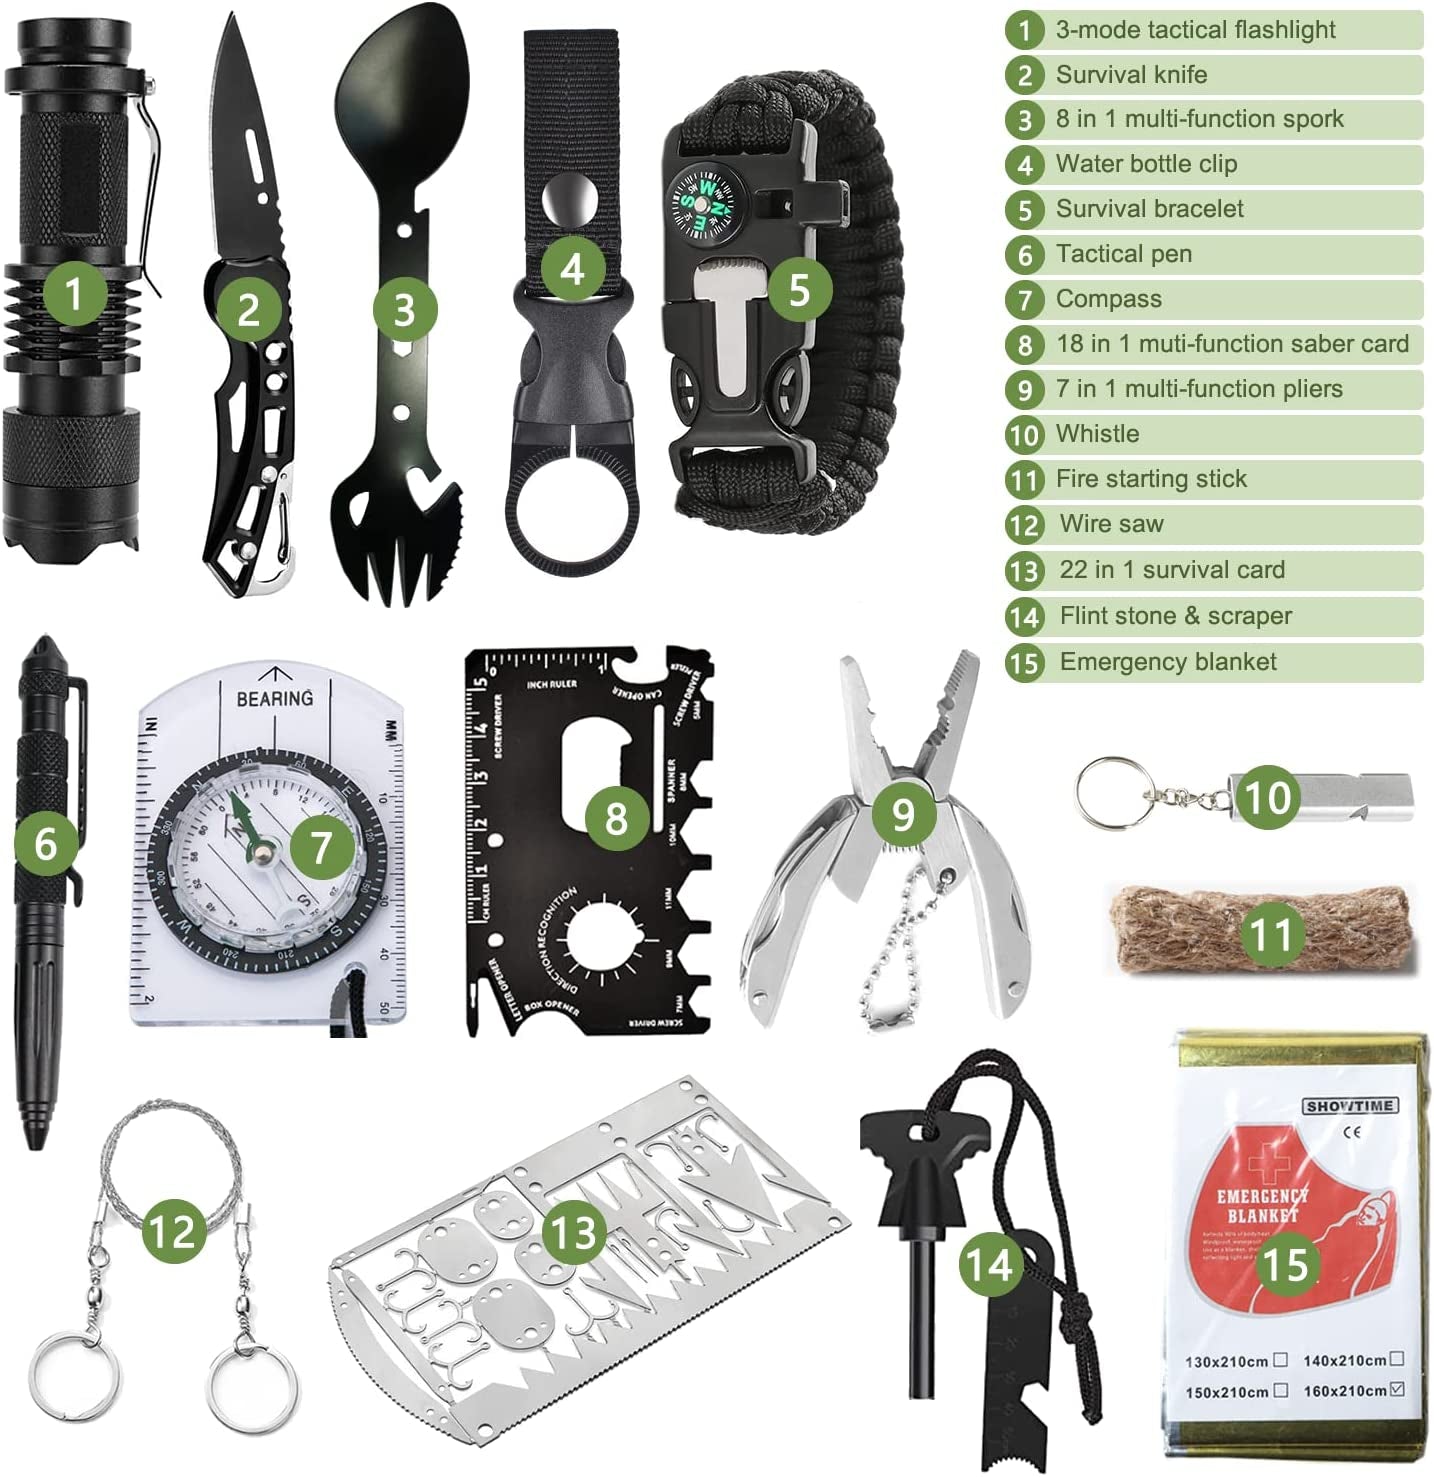 Survival Kit,17 in 1 Survival Gear and Equipment, Factical Fanny Pack, First Aid Kit with Emergency Knife Blanket Flashlight Compass Multispork Whistle Fishcard